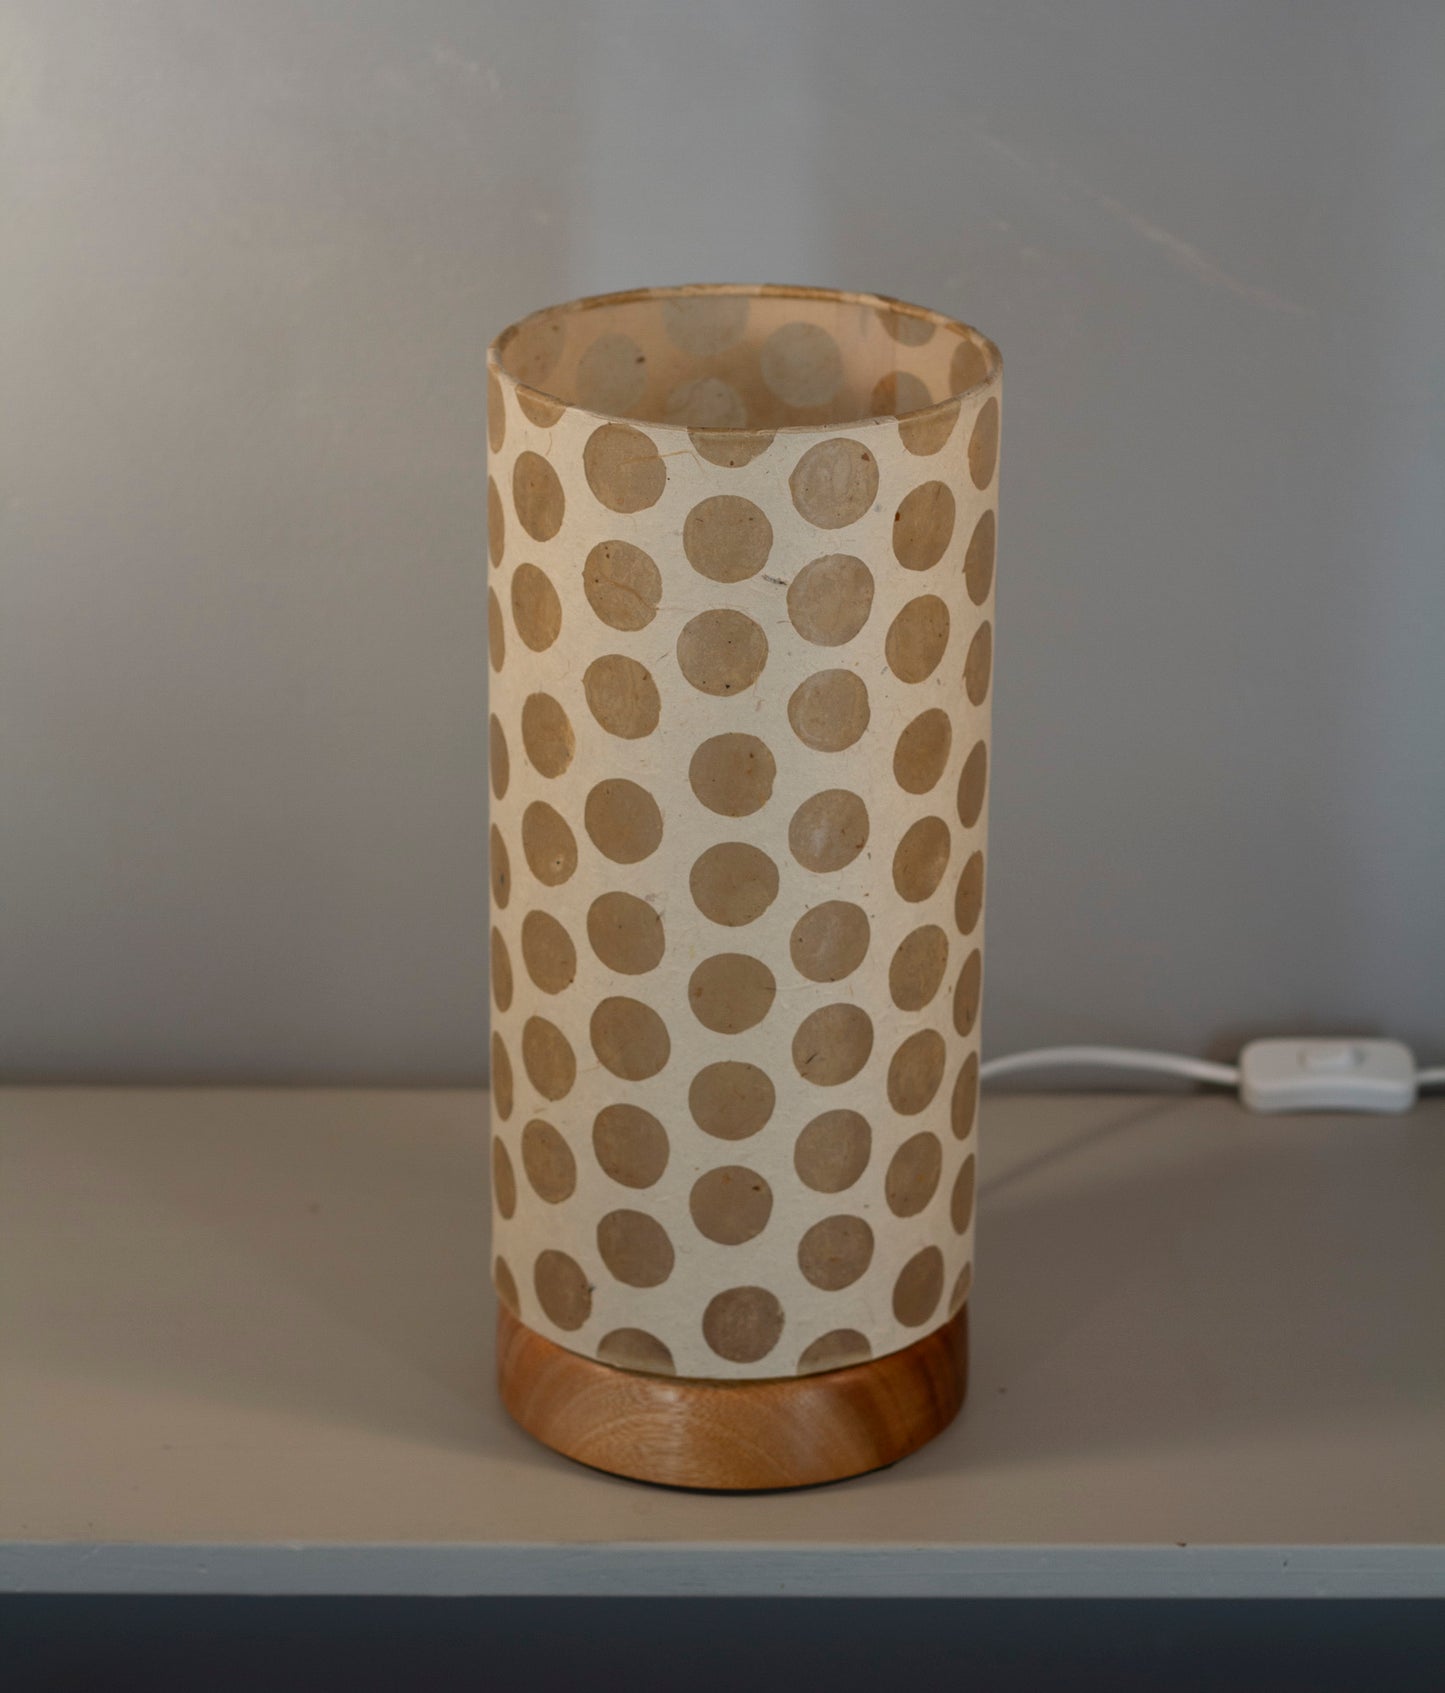 Flat Round Sapele Table Lamp with 15cm x 30cm Lampshade in P85 ~ Batik Dots on Natural